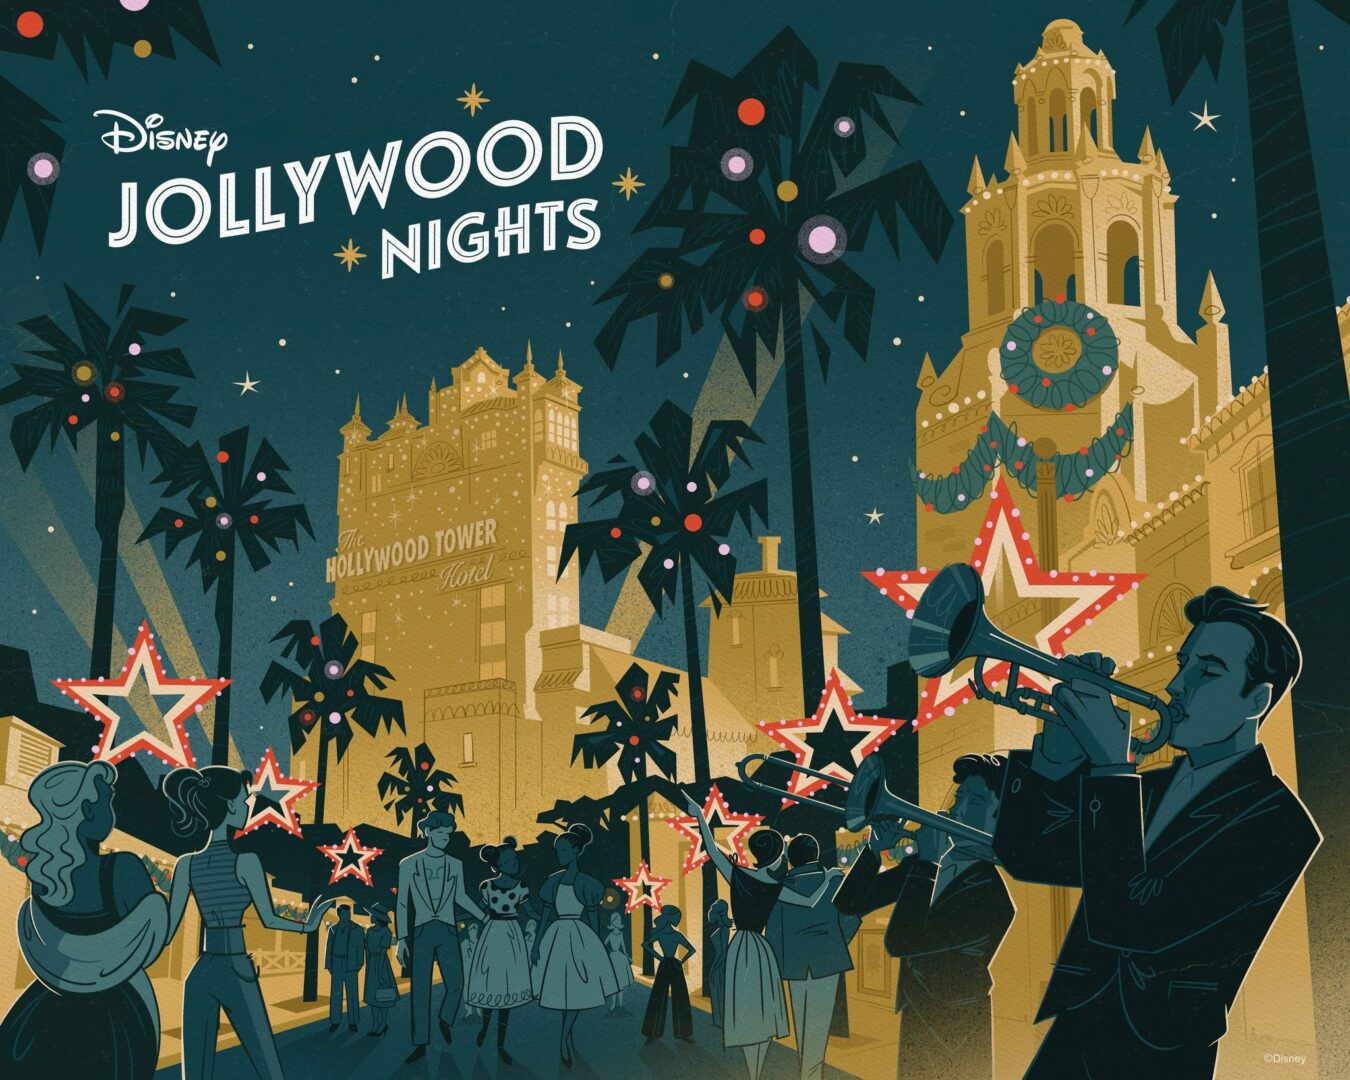 Disney Announces New Holiday After-Hours Party Jollywood Nights at Disney’s Hollywood Studios